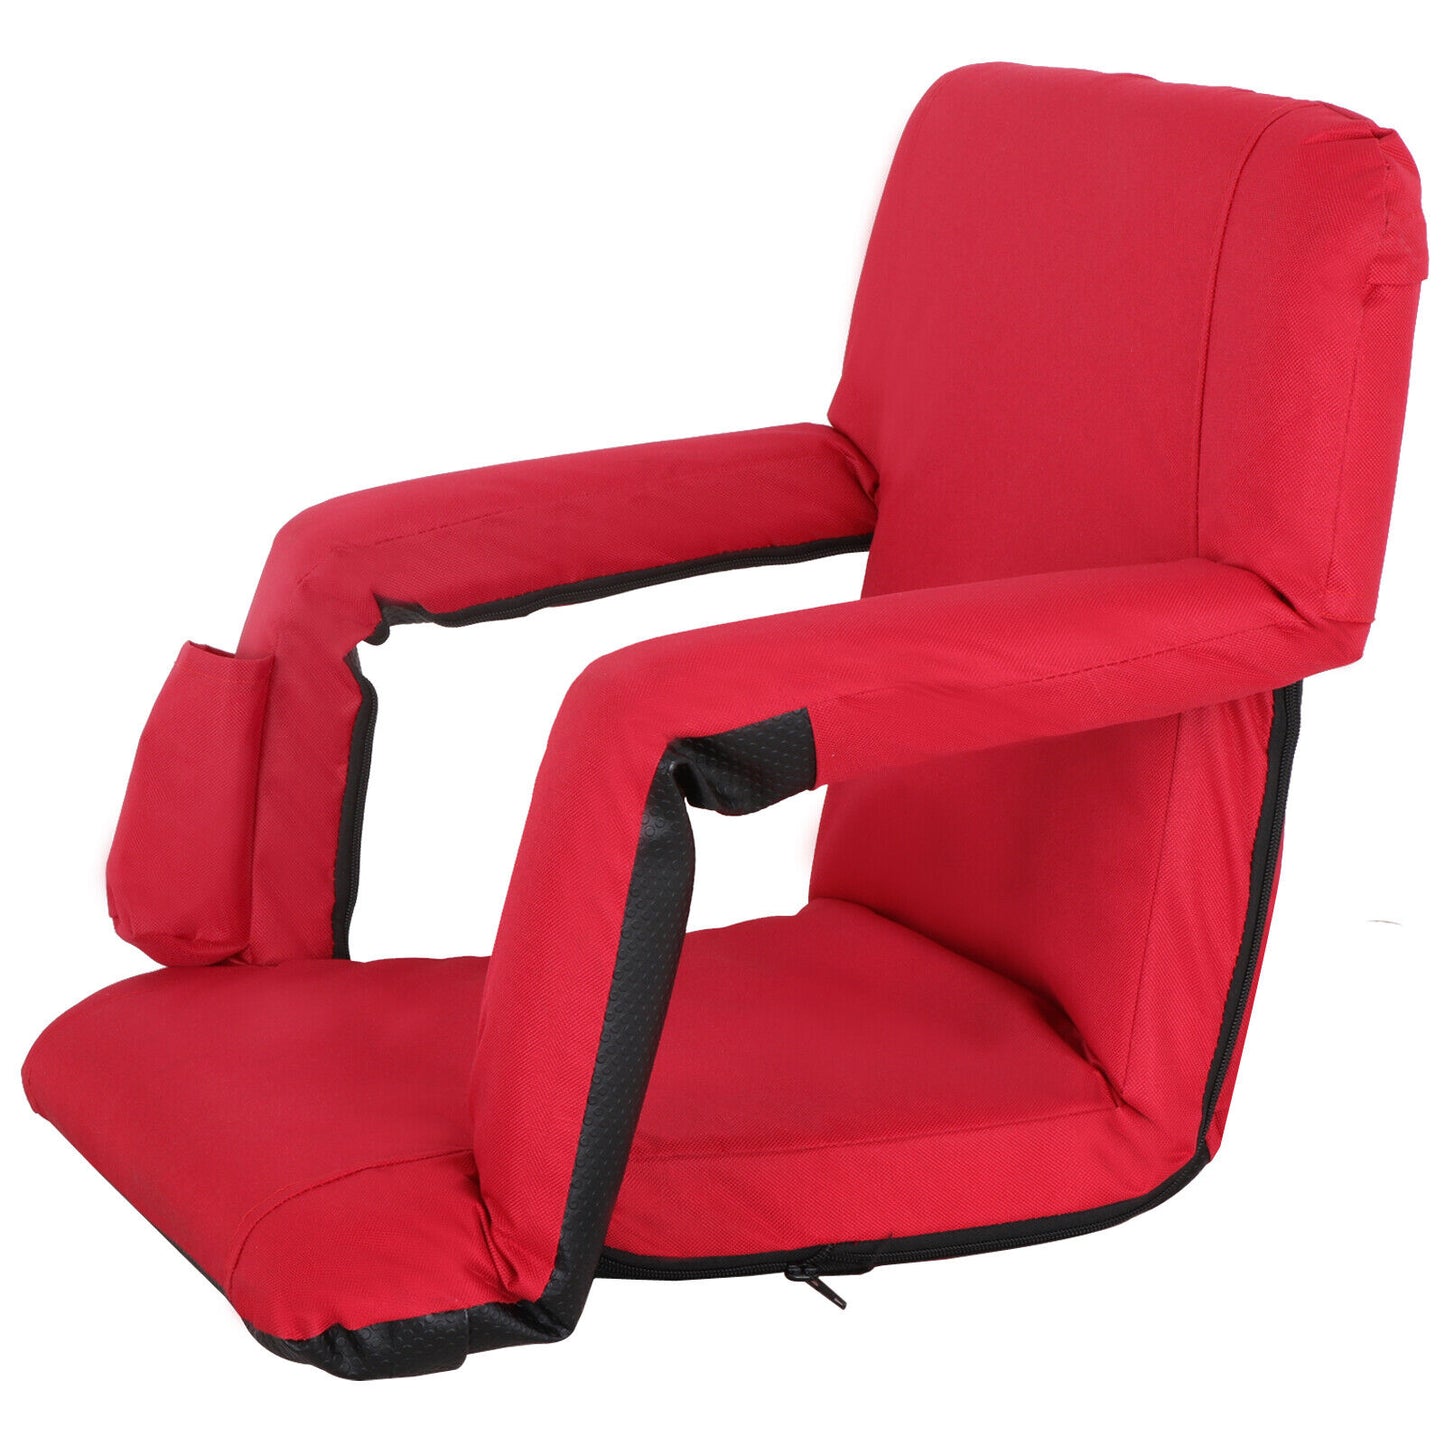 Red Wide Stadium Seats Chairs for Bleachers Benches W/Back 5 Reclining Positions